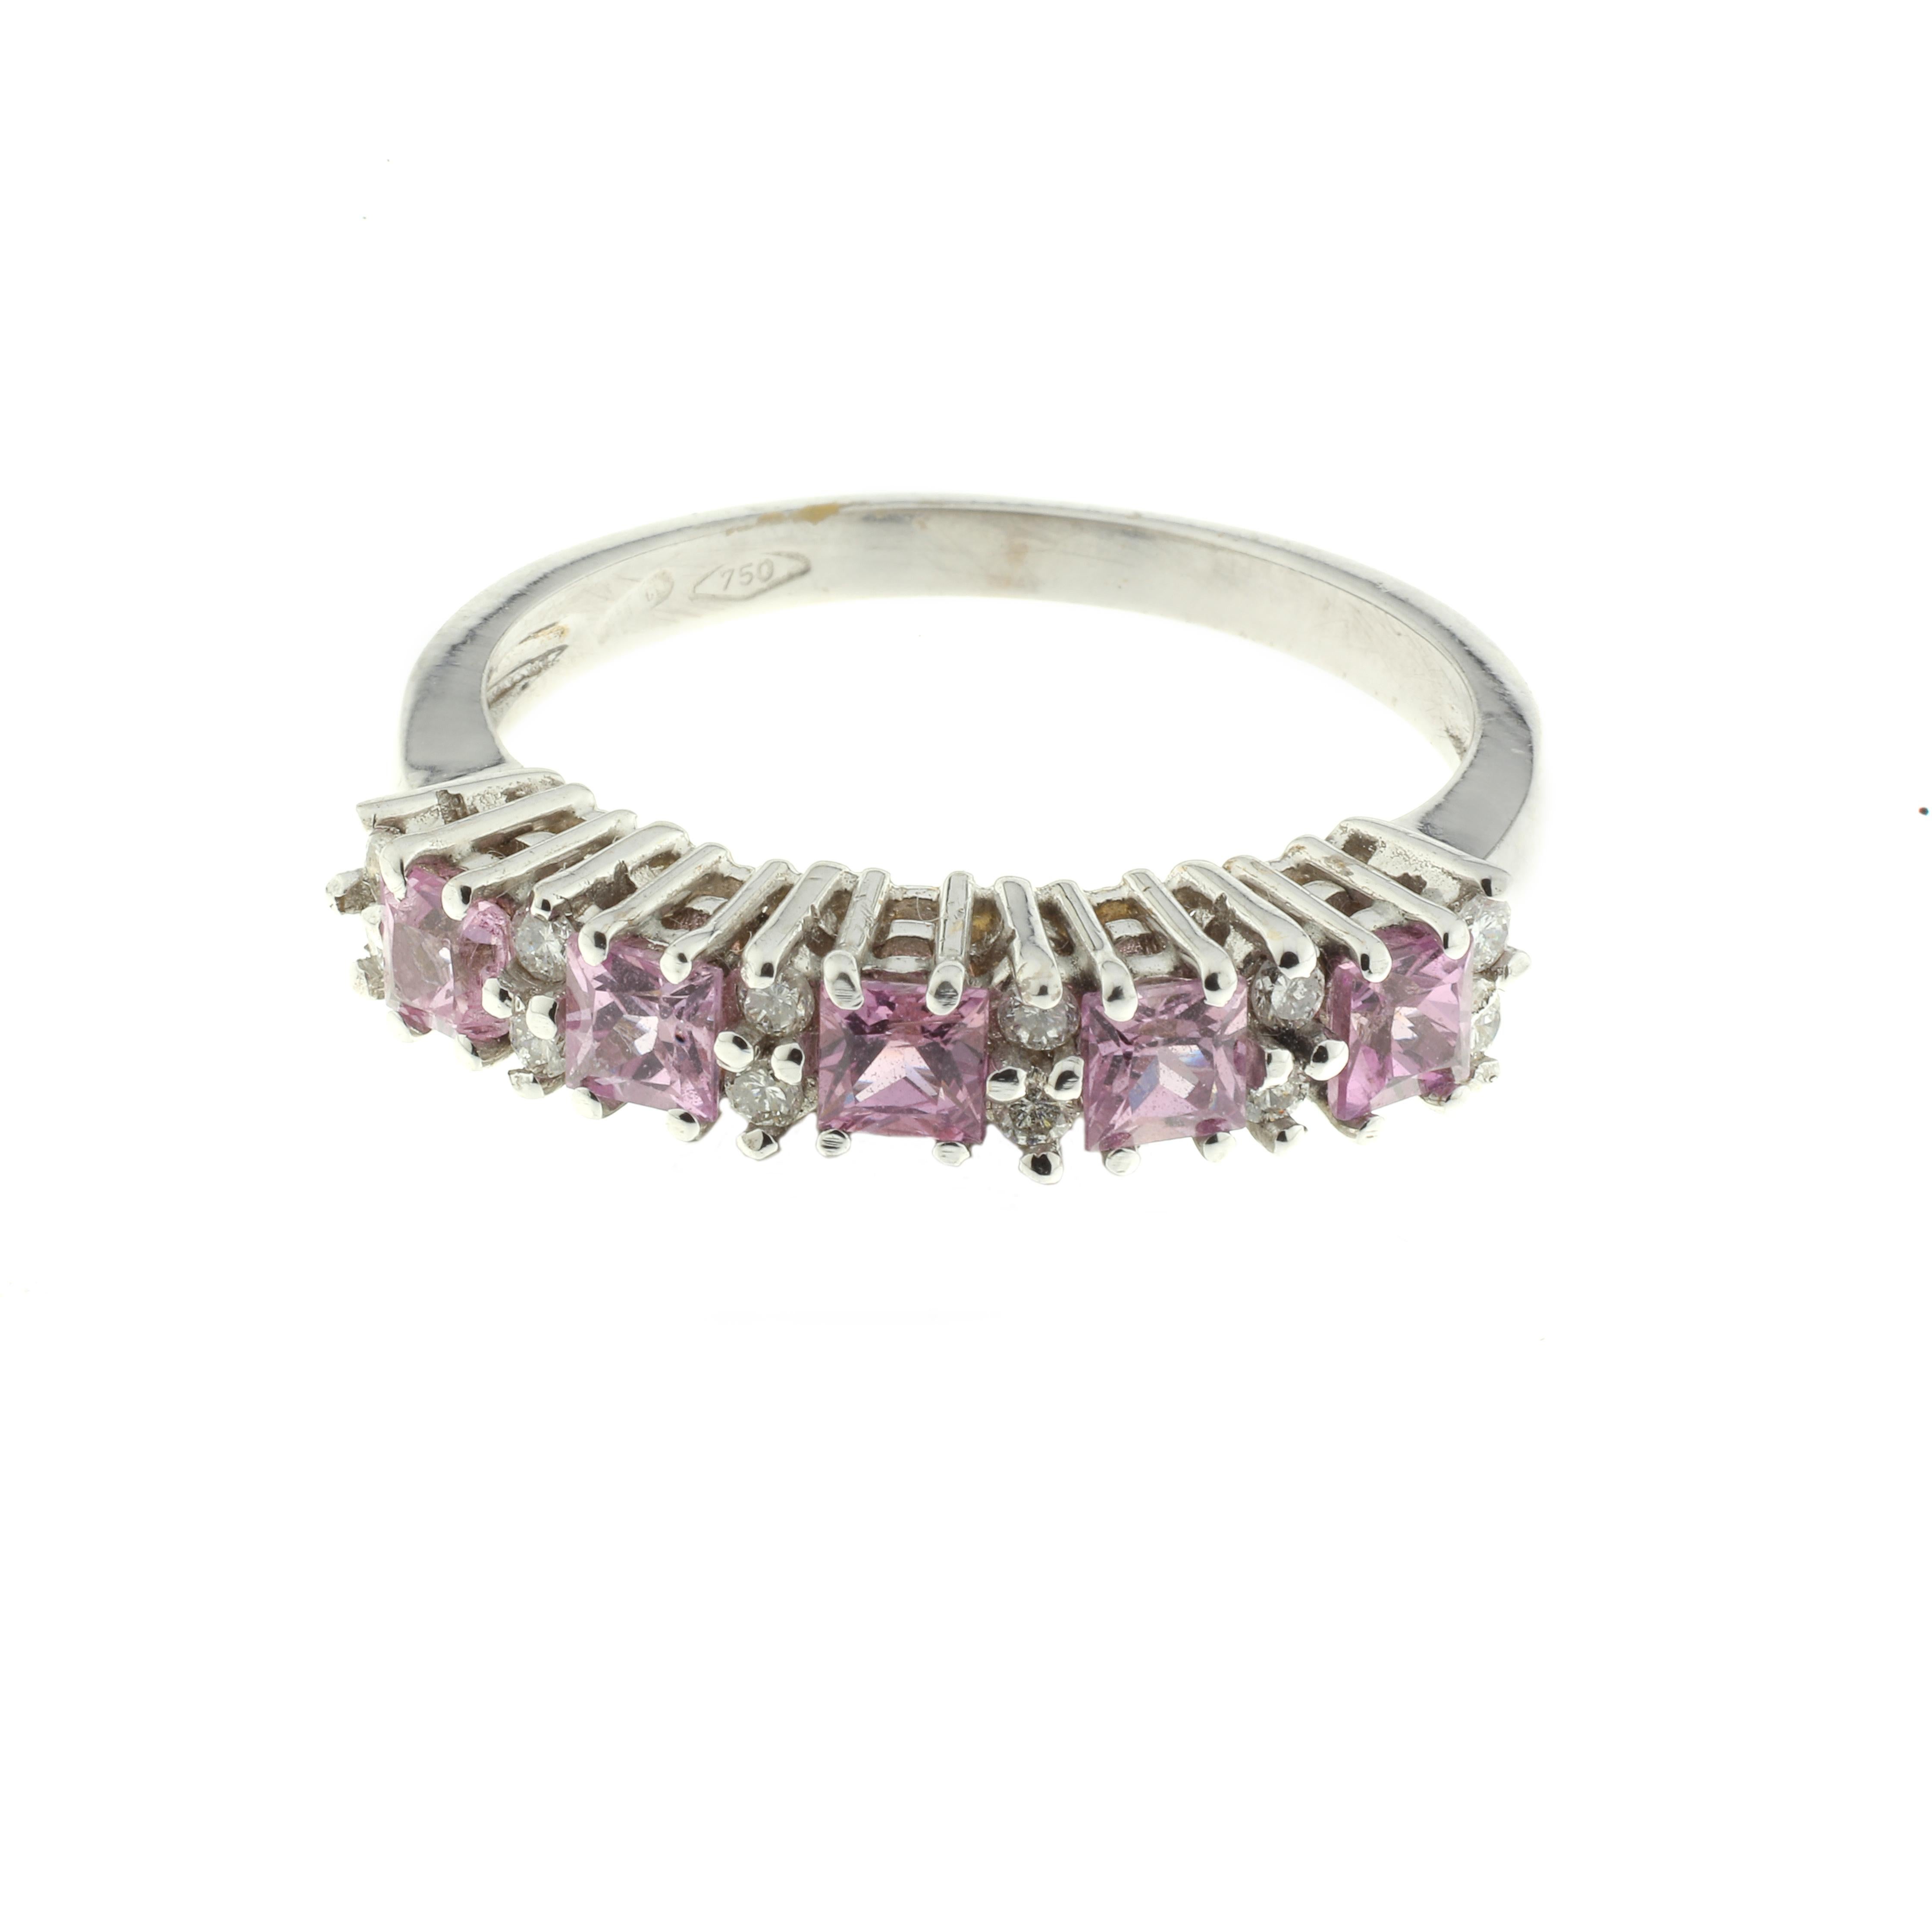 A beautiful ring, masterfully created entirely by hand and featuring carefully selected pink sapphires and white diamonds. The ring is 18-karat white gold.

The ring is equally beautiful on its own or as the jewel of a stack of rings. The